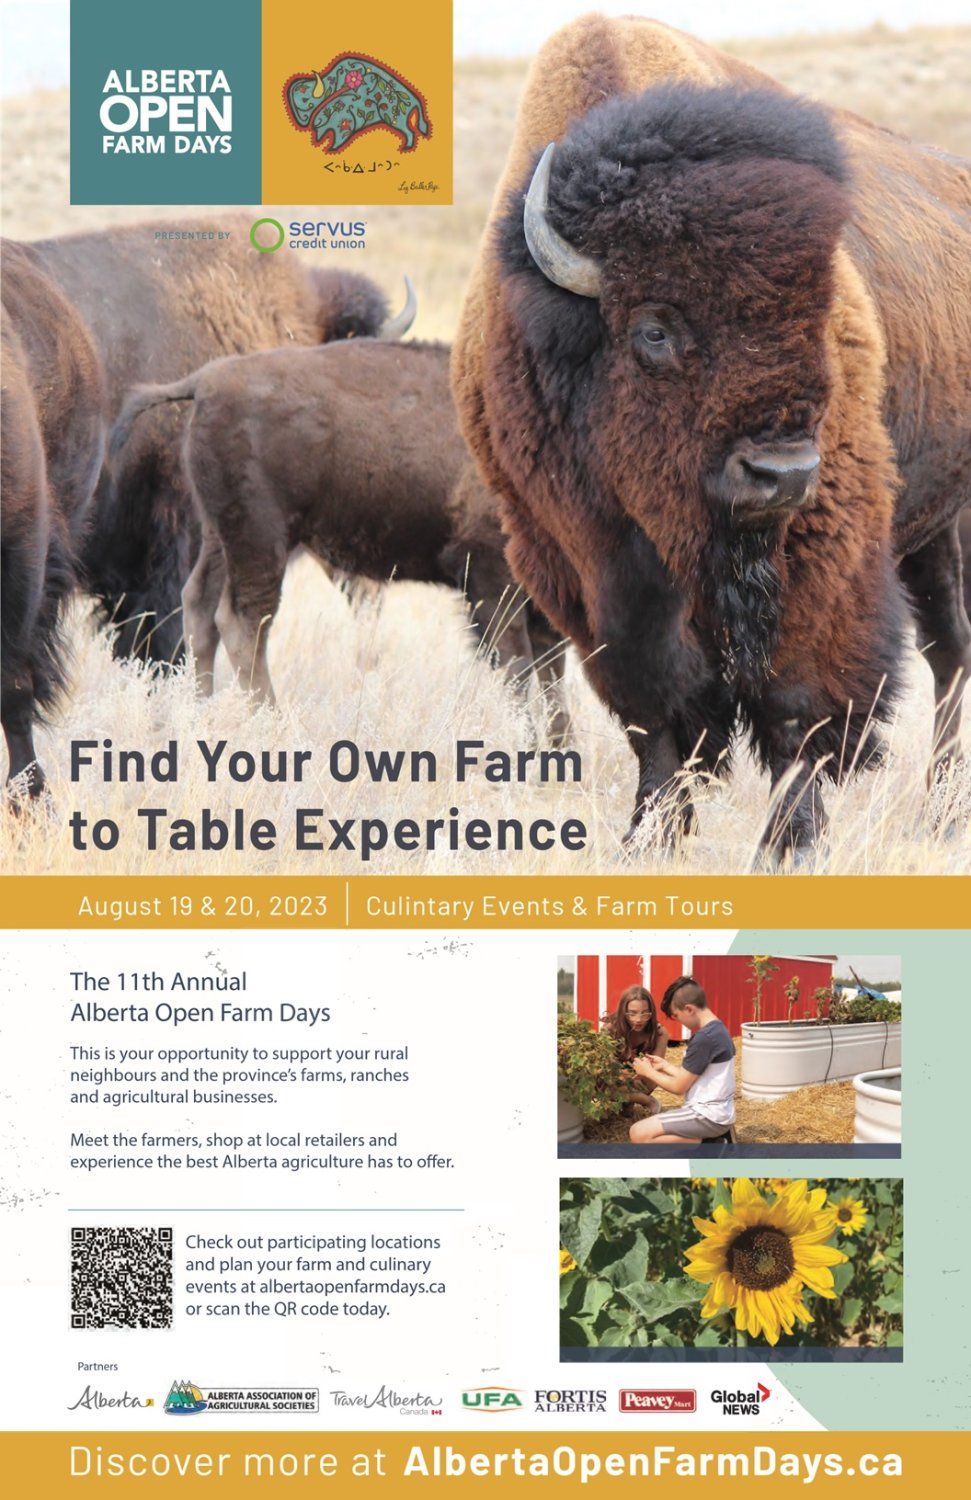 Previous Happening: Open Farm Days Coming Sunday, August 20th. Come Out and Join Us!